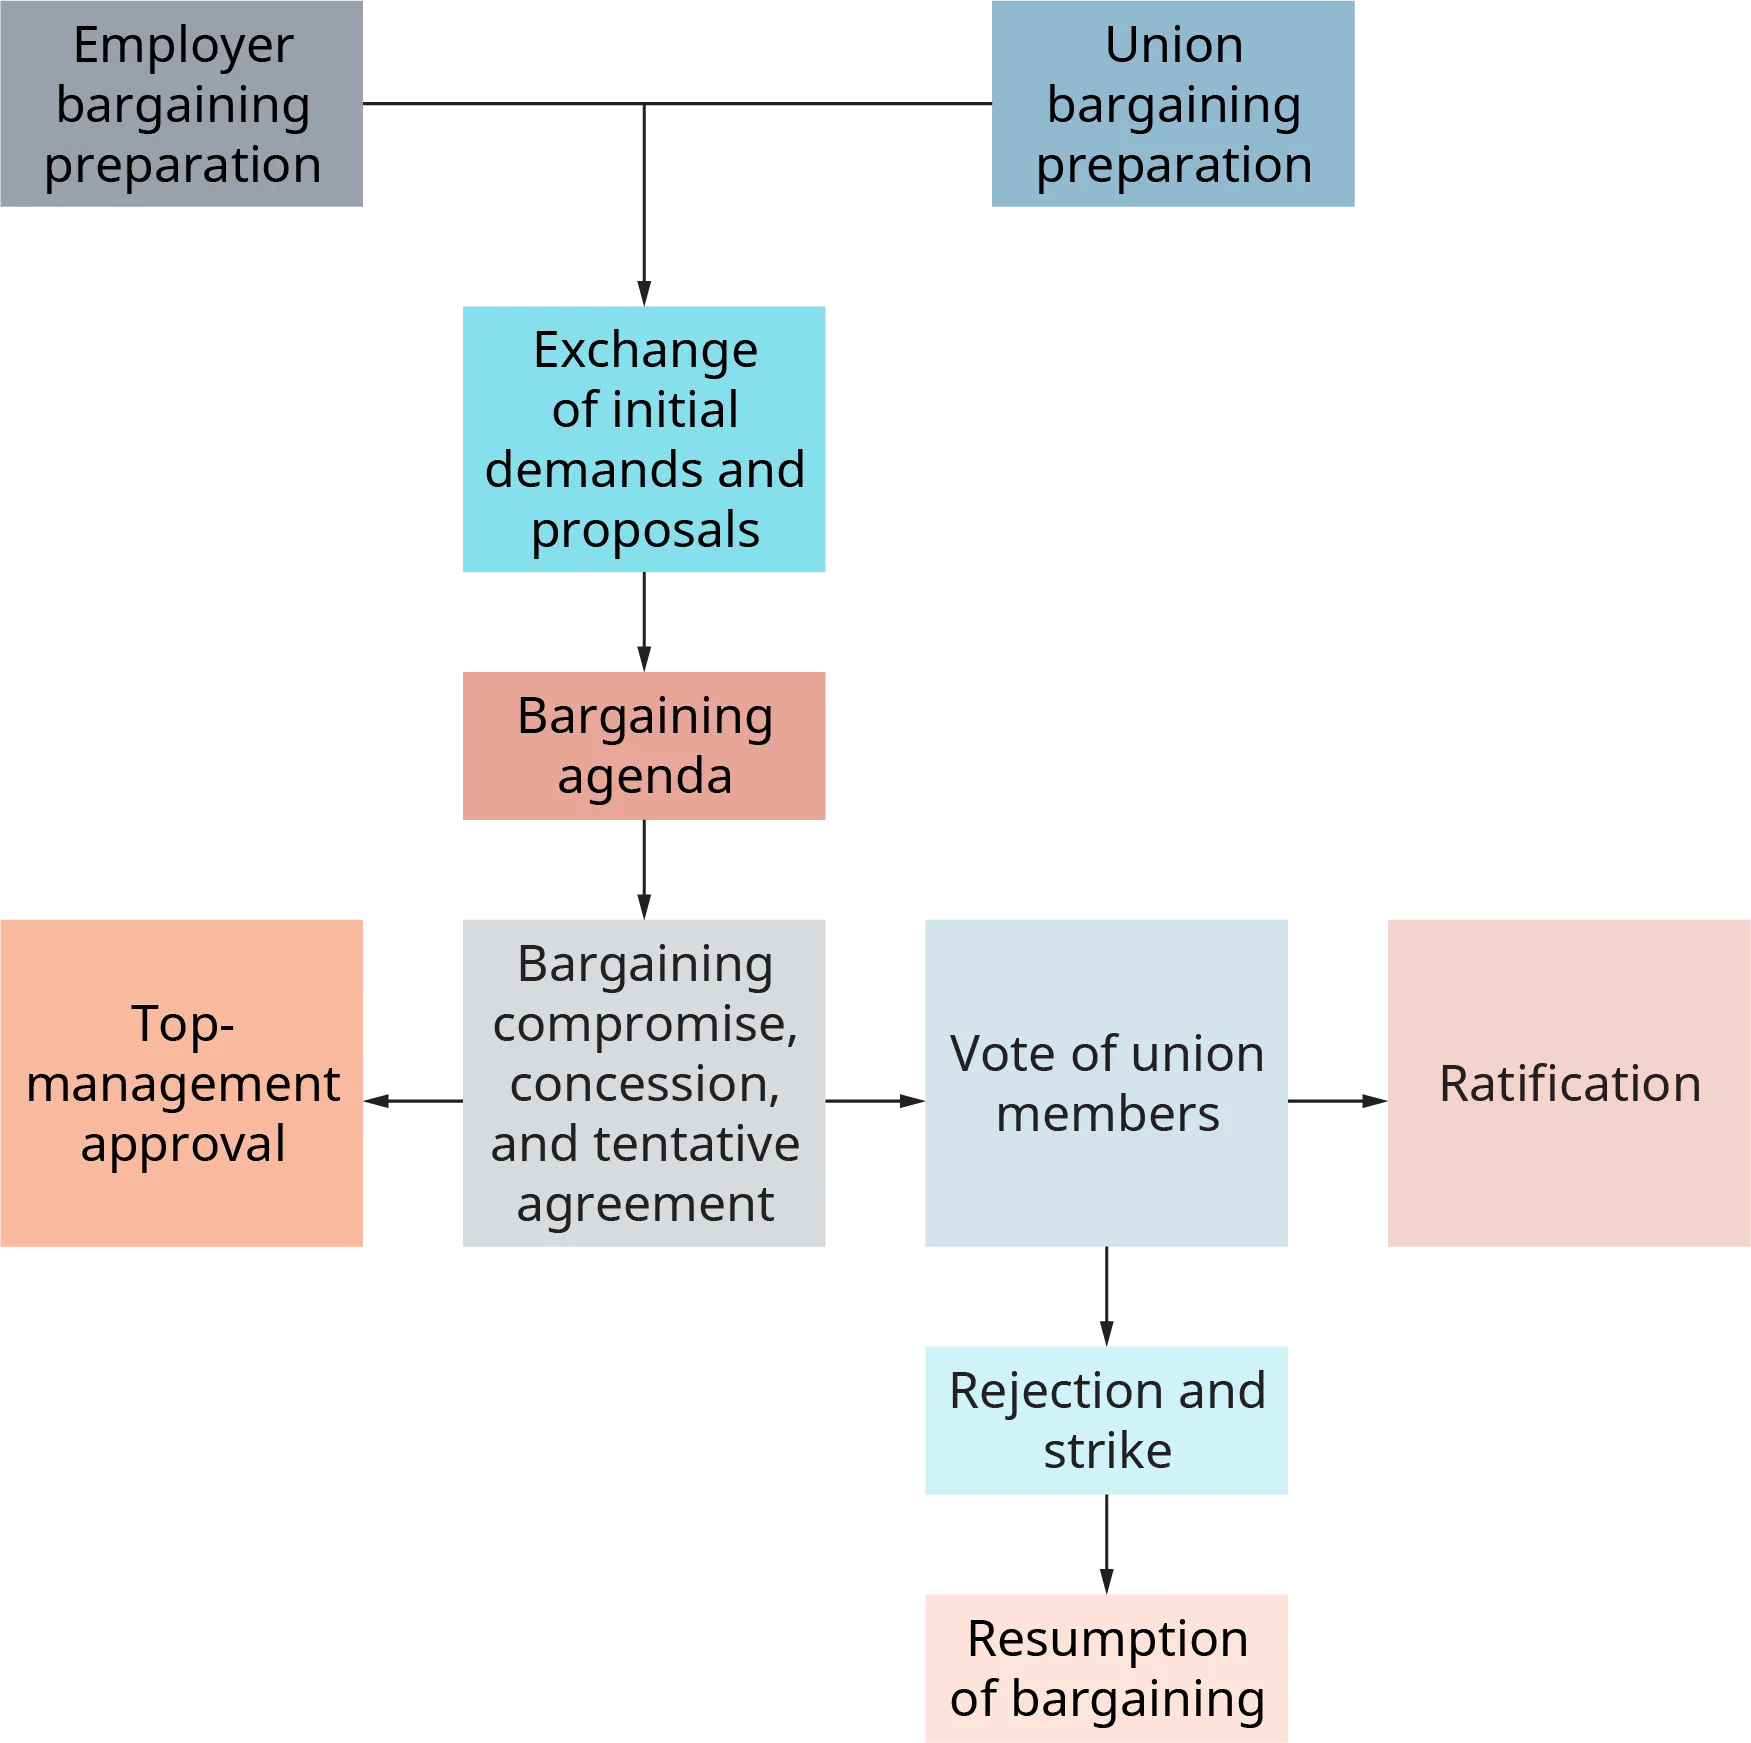 The chart starts with two separate boxes, one labeled employer bargaining preparation, and the other label reads union bargaining preparation. These both flow into a box labeled exchange of initial demands and proposals. This flows into bargaining agenda. This flows into bargaining compromise, concession, and tentative agreement. This branches in two directions. In one direction, it branches to top management approval. This is the end of this branch. In the other direction, it flows into vote of union members. This then flows into 2 directions. In one direction, it branches to ratification, which is the end of this branch. In the other direction, it flows into rejection and strike, which then flows into resumption of bargaining. This is the end of the flow chart.